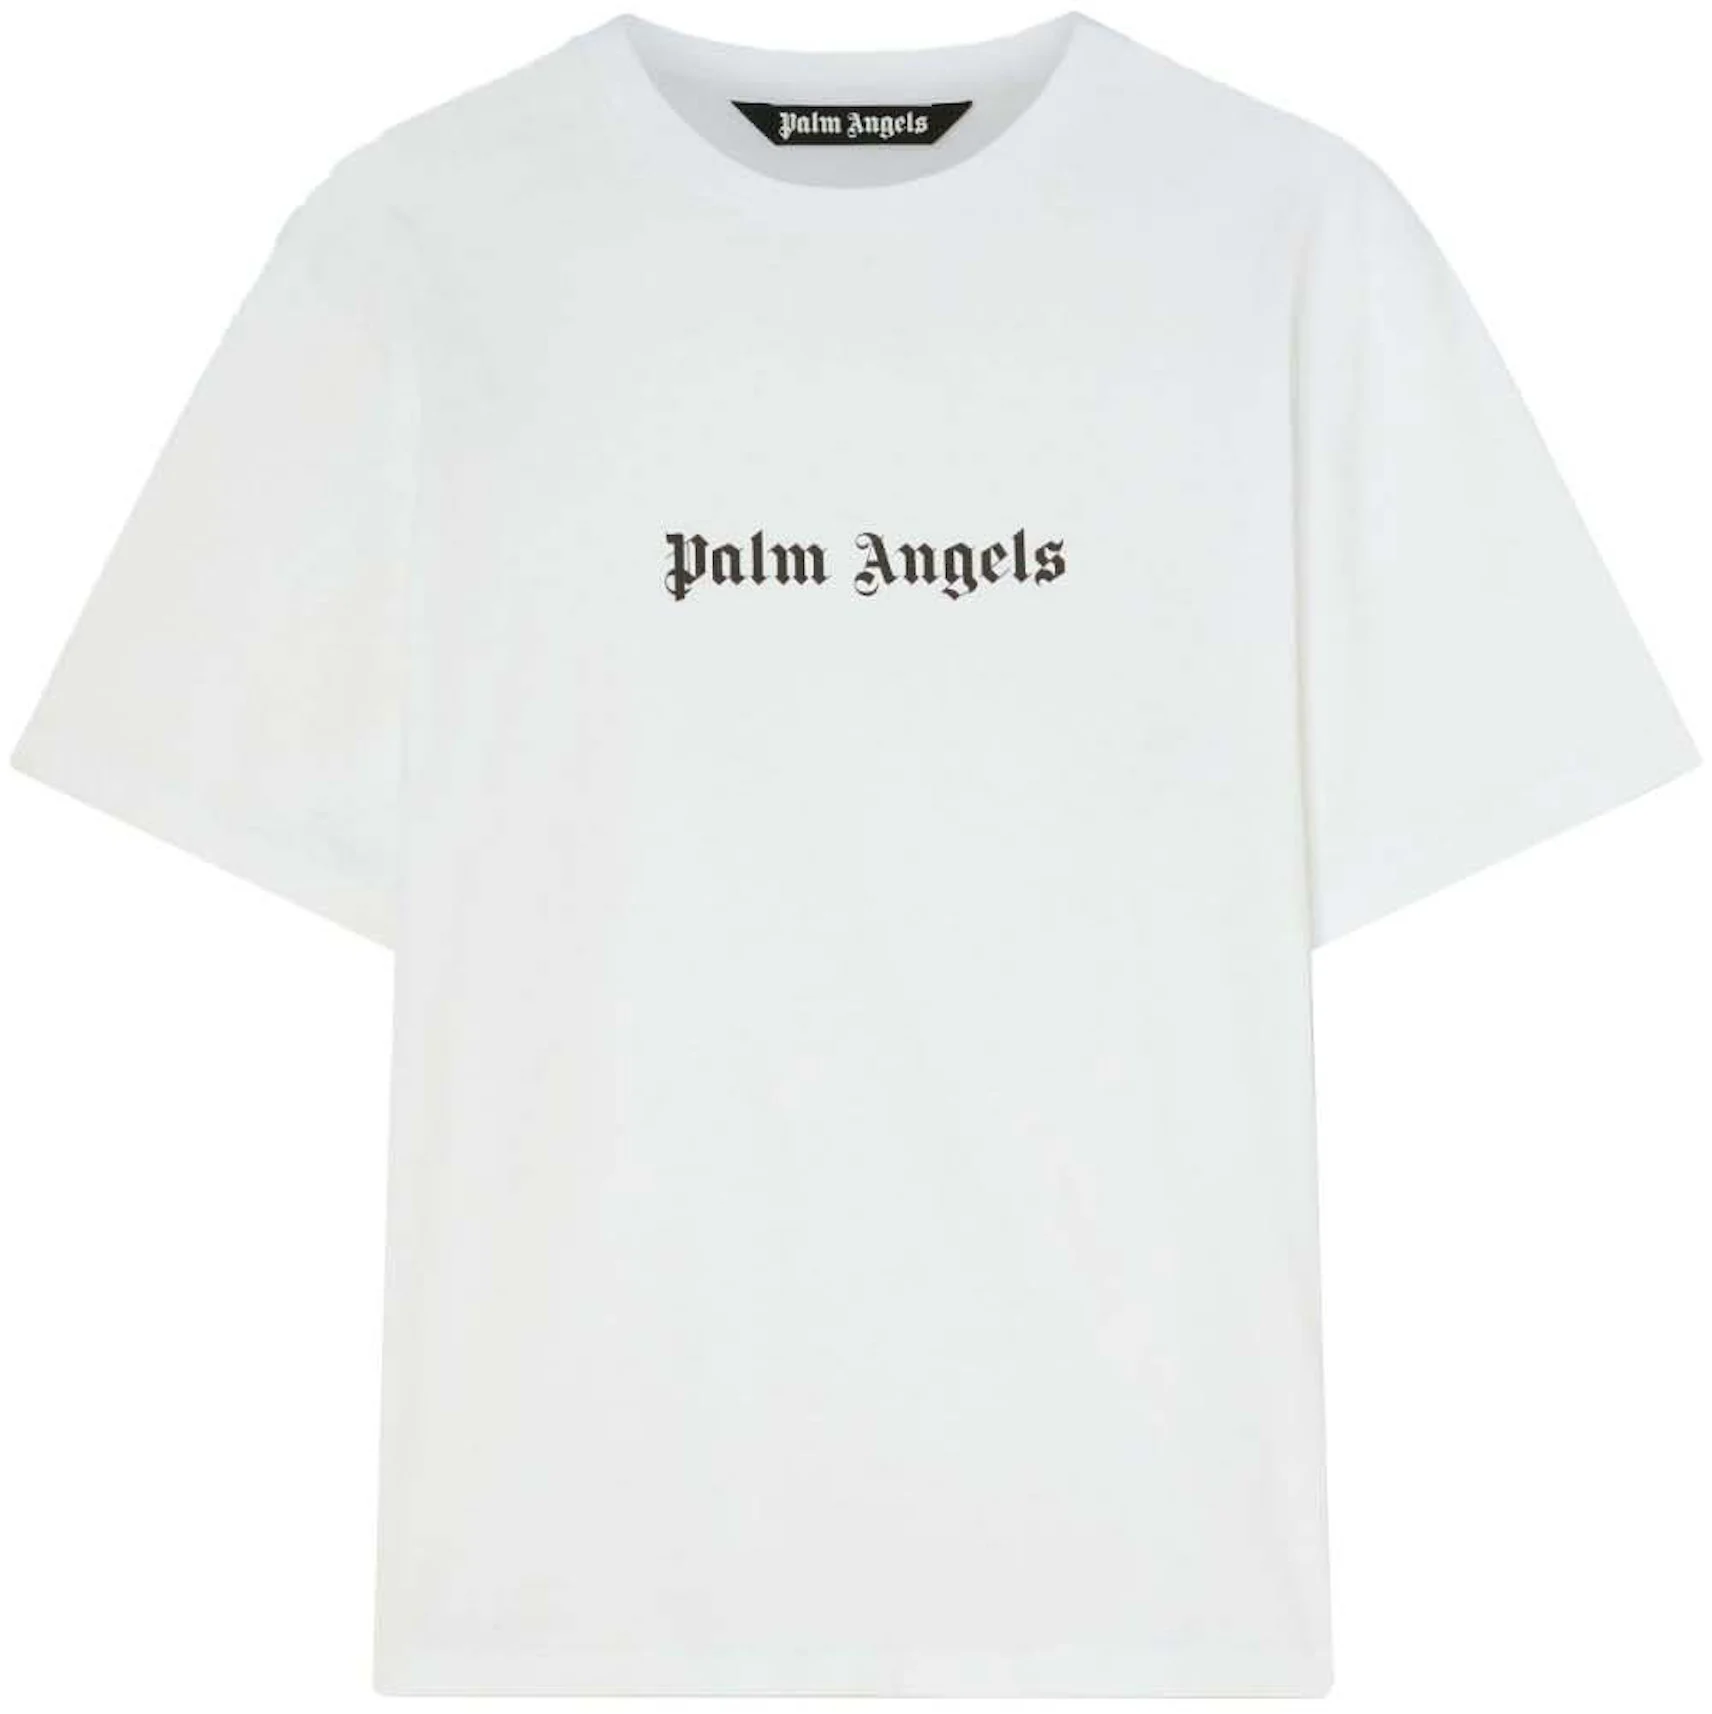 CLASSIC LOGO OVER T-SHIRT in black - Palm Angels® Official